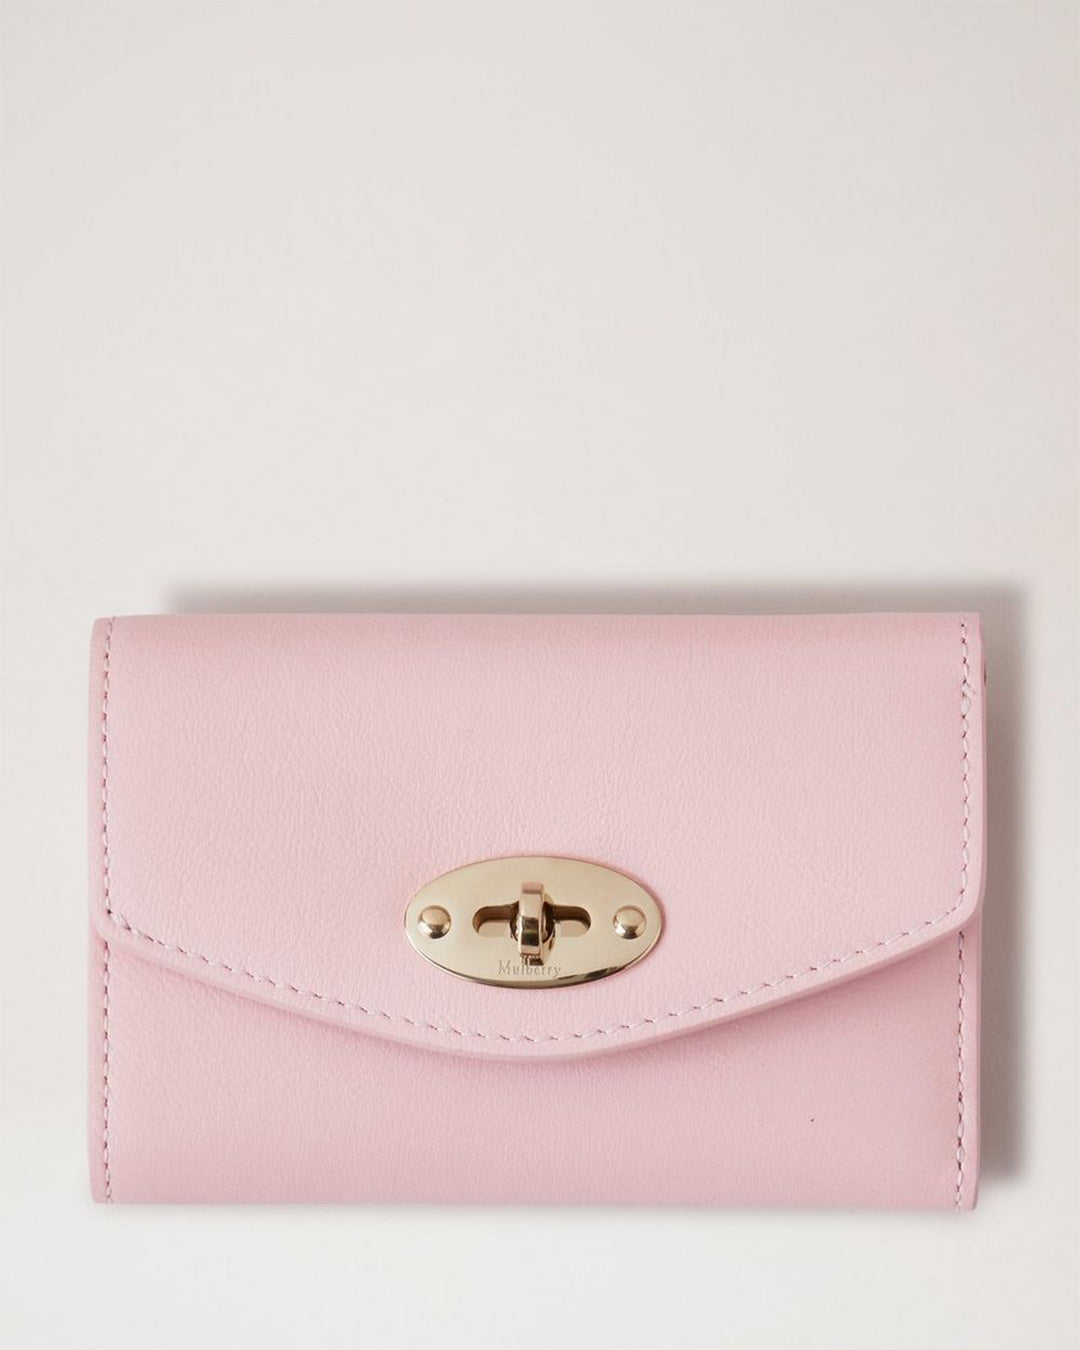 Mulberry Folded Darley Wallet Micro Classic Grain